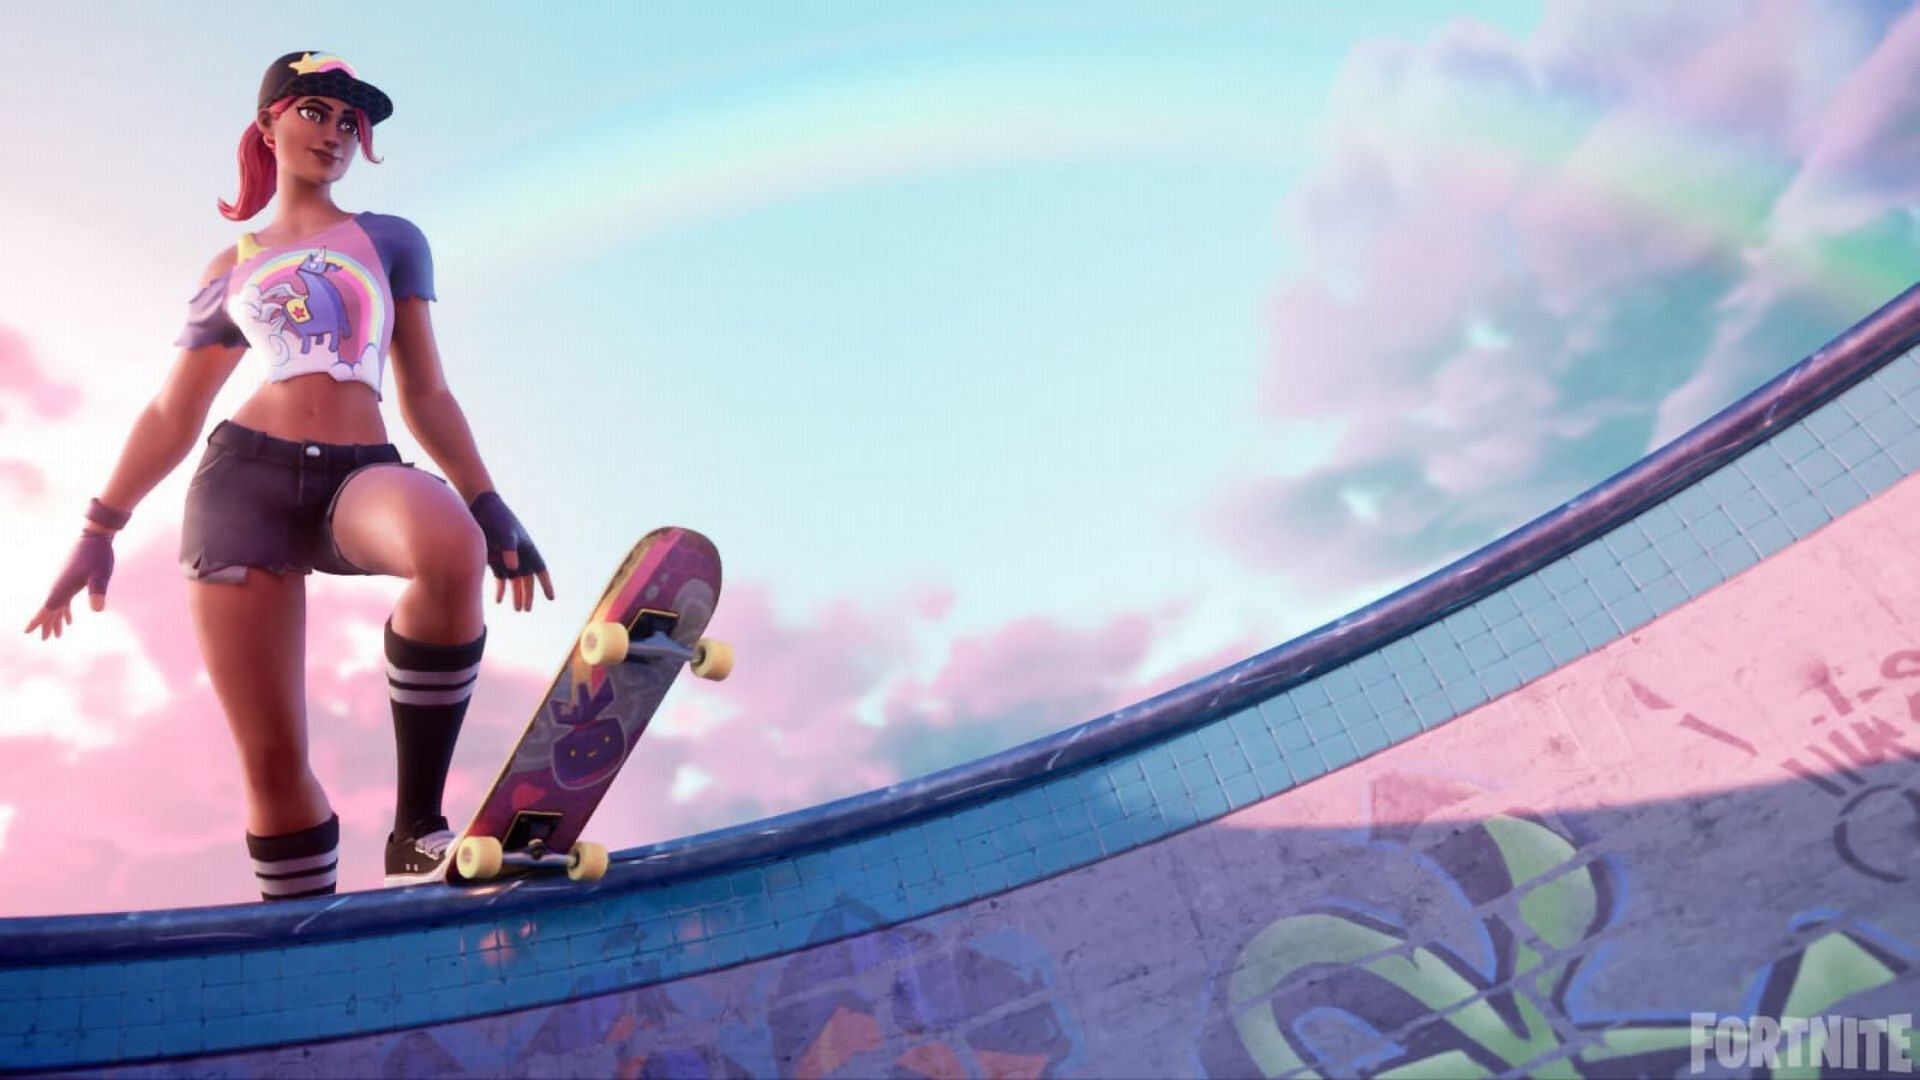 Skateboards are coming to Fortnite (Image via Epic Games)